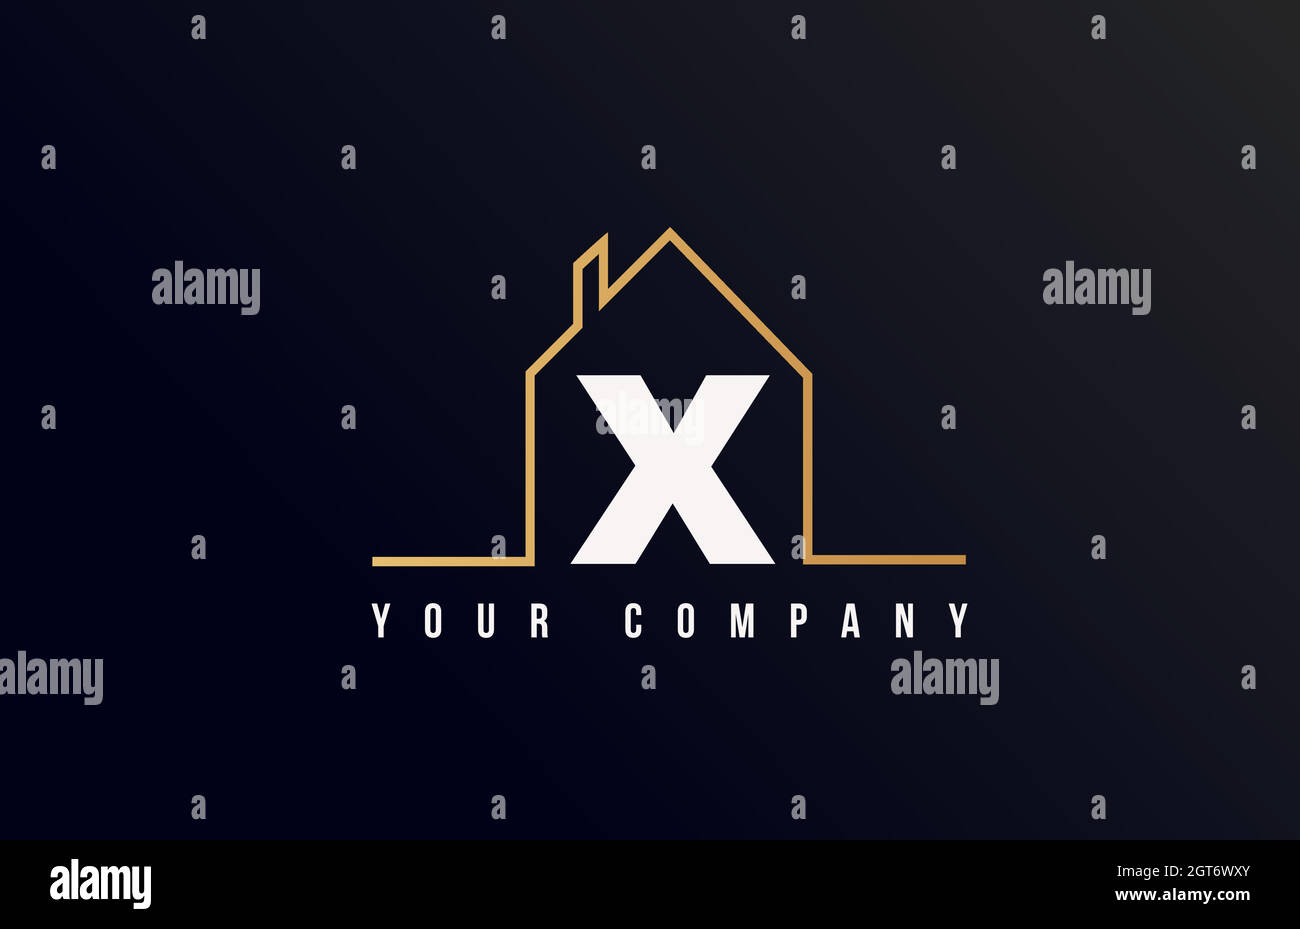 X house alphabet letter icon logo design. House real estate for company and business identity with line contour of a home Stock Vector